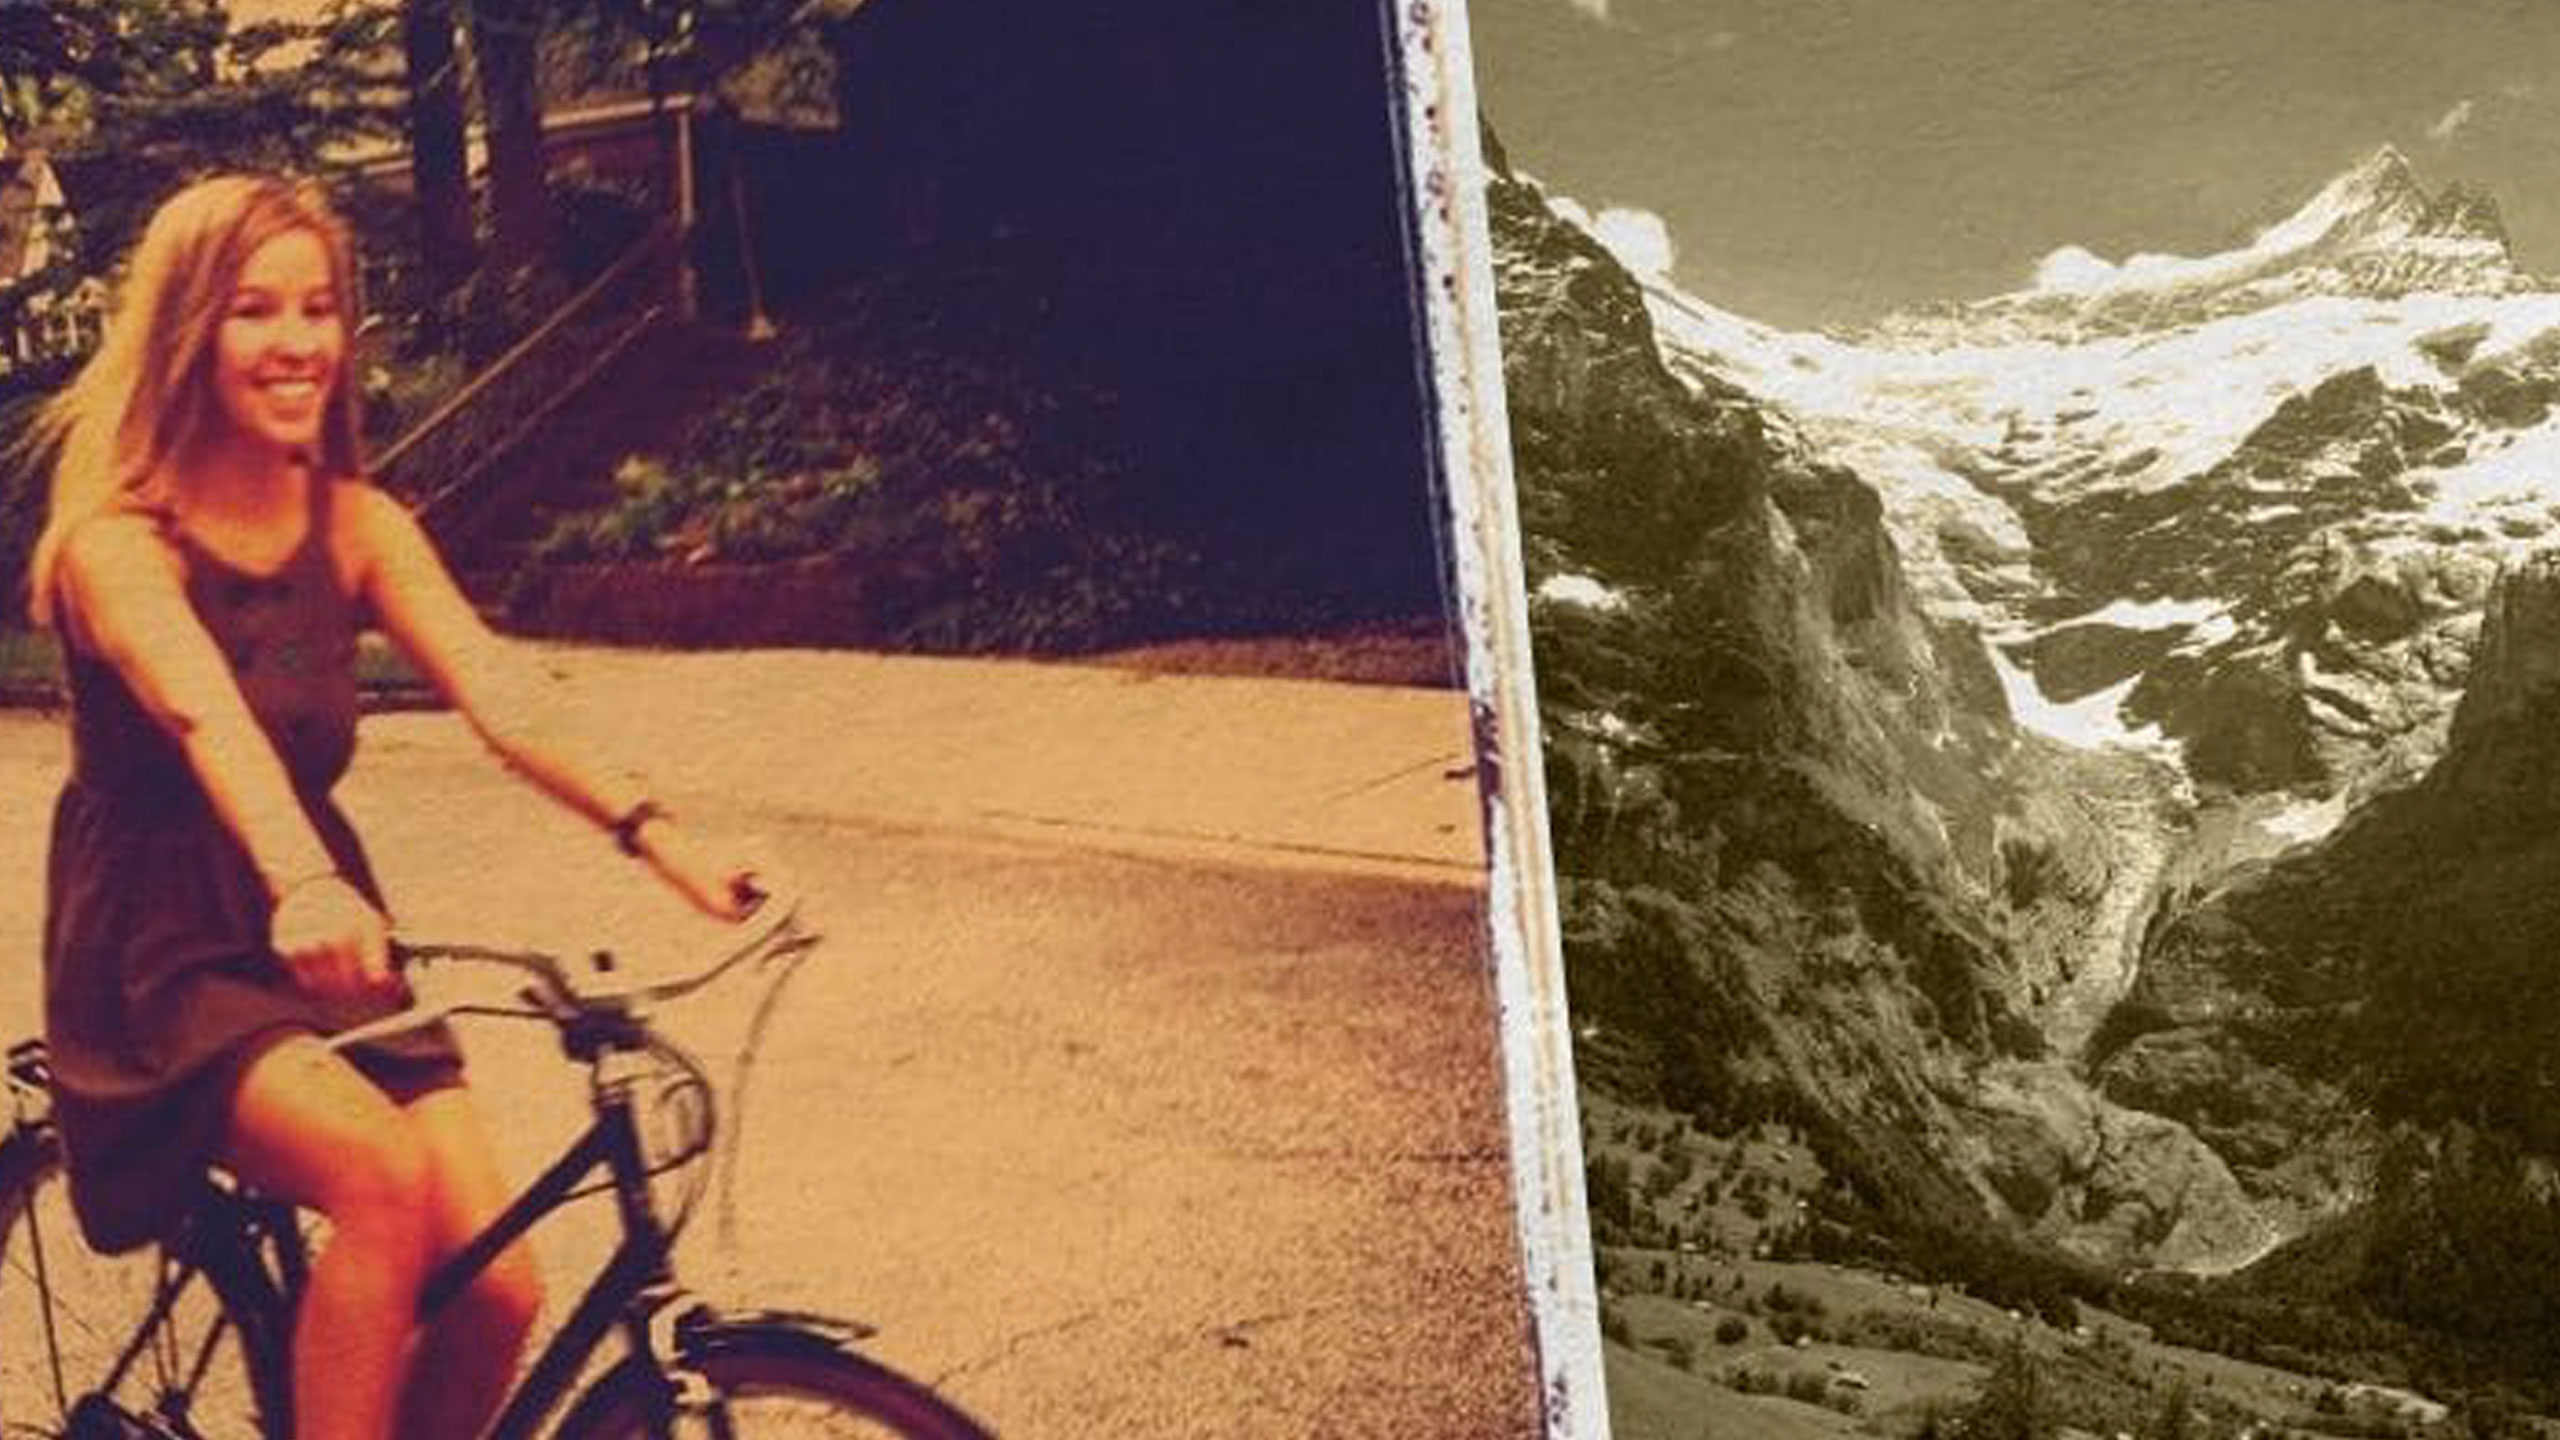 A young woman rides a bicycle, a photo of a snowy mountain in the background